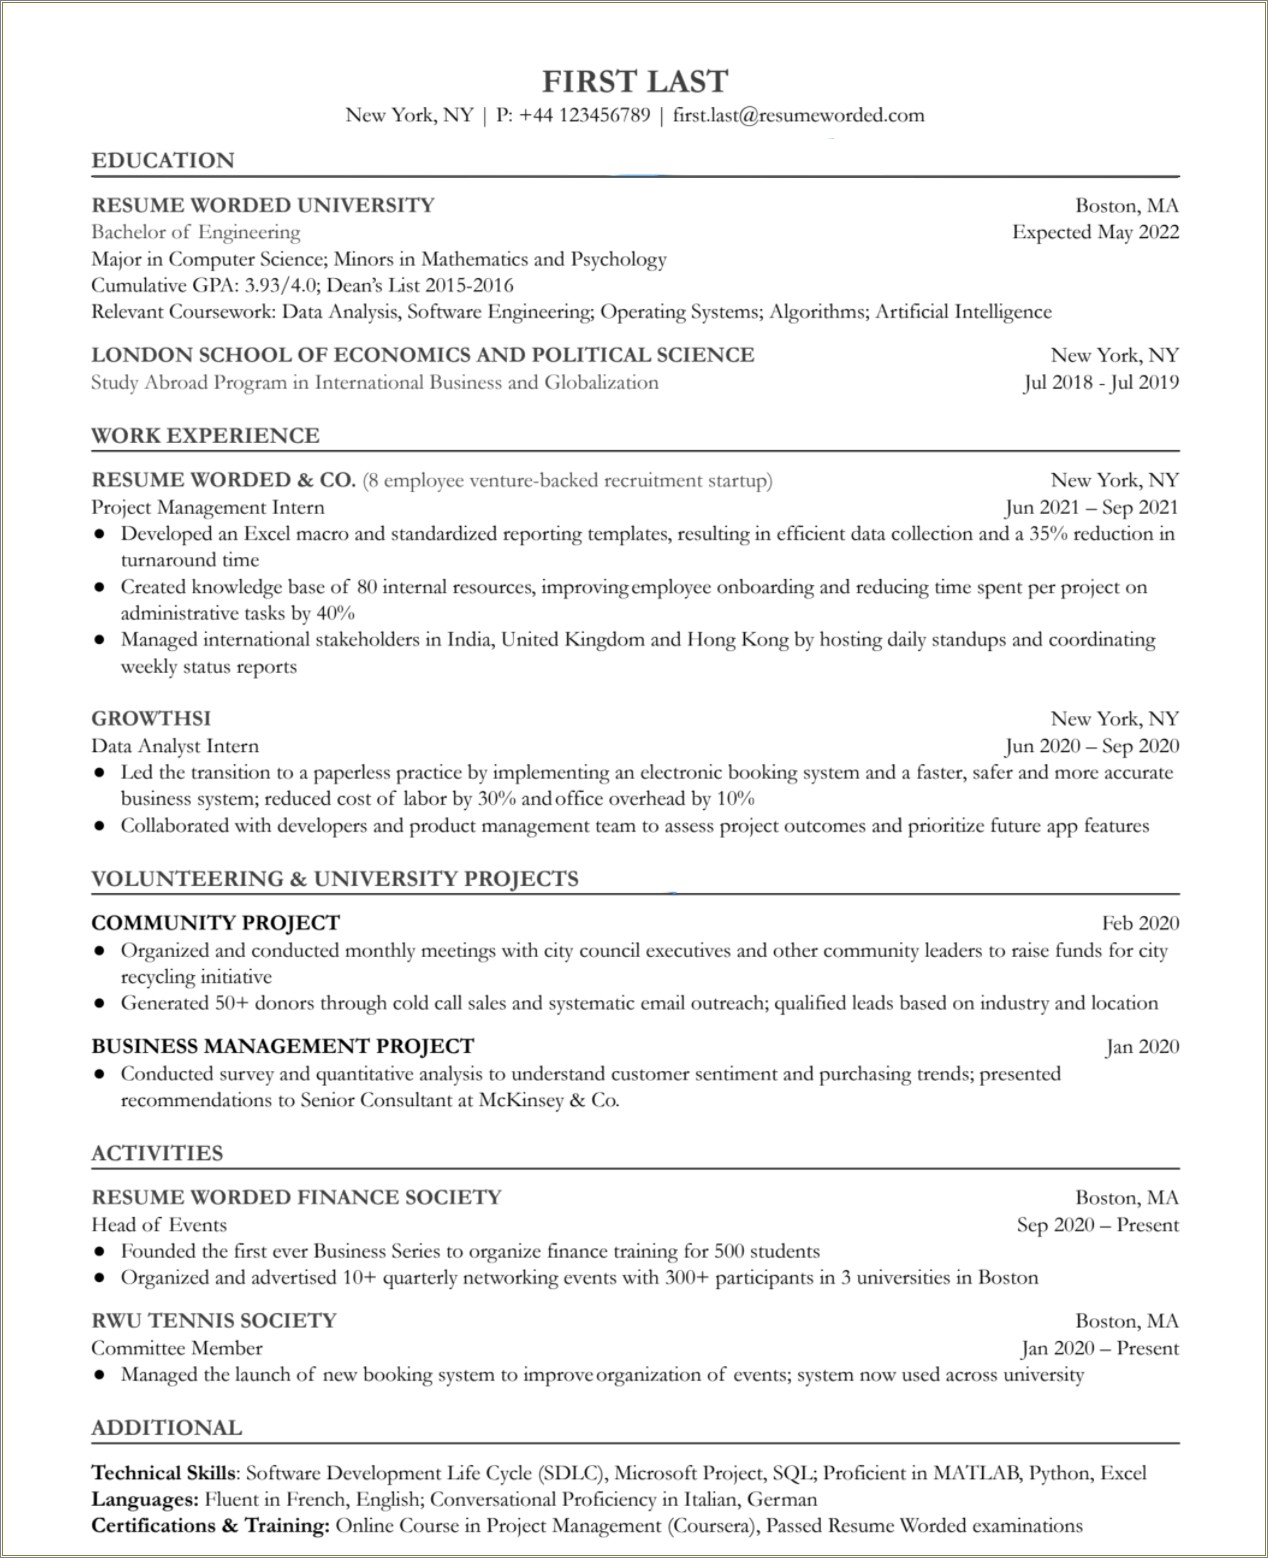 Resume With No Work Experience 2019